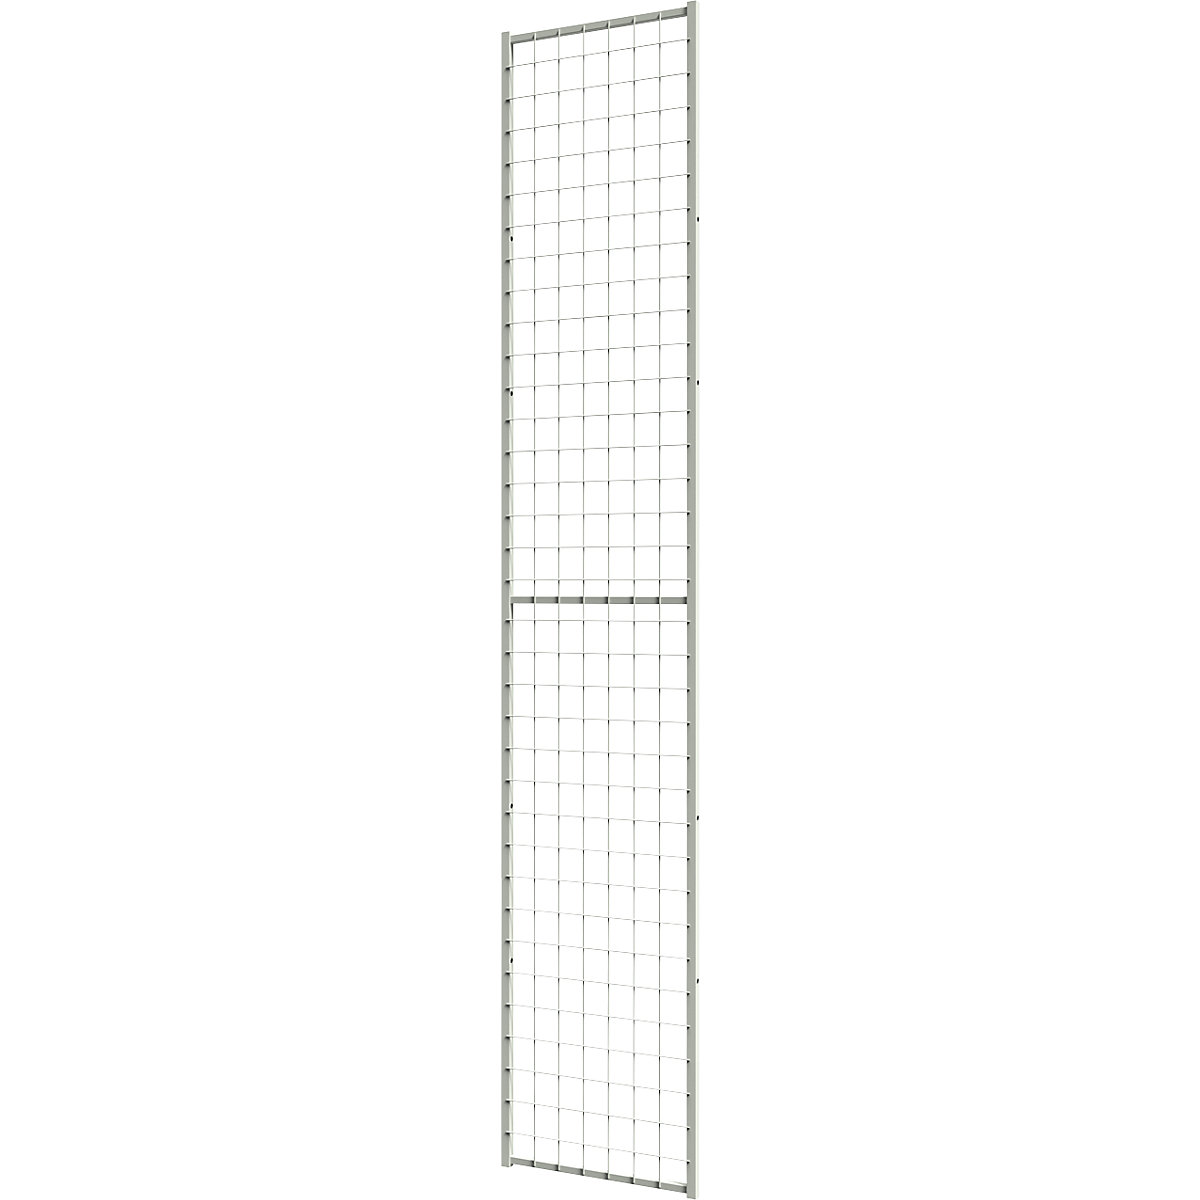 X-STORE 2.0 partition system, wall section – Axelent, height 2200 mm, width 400 mm-5